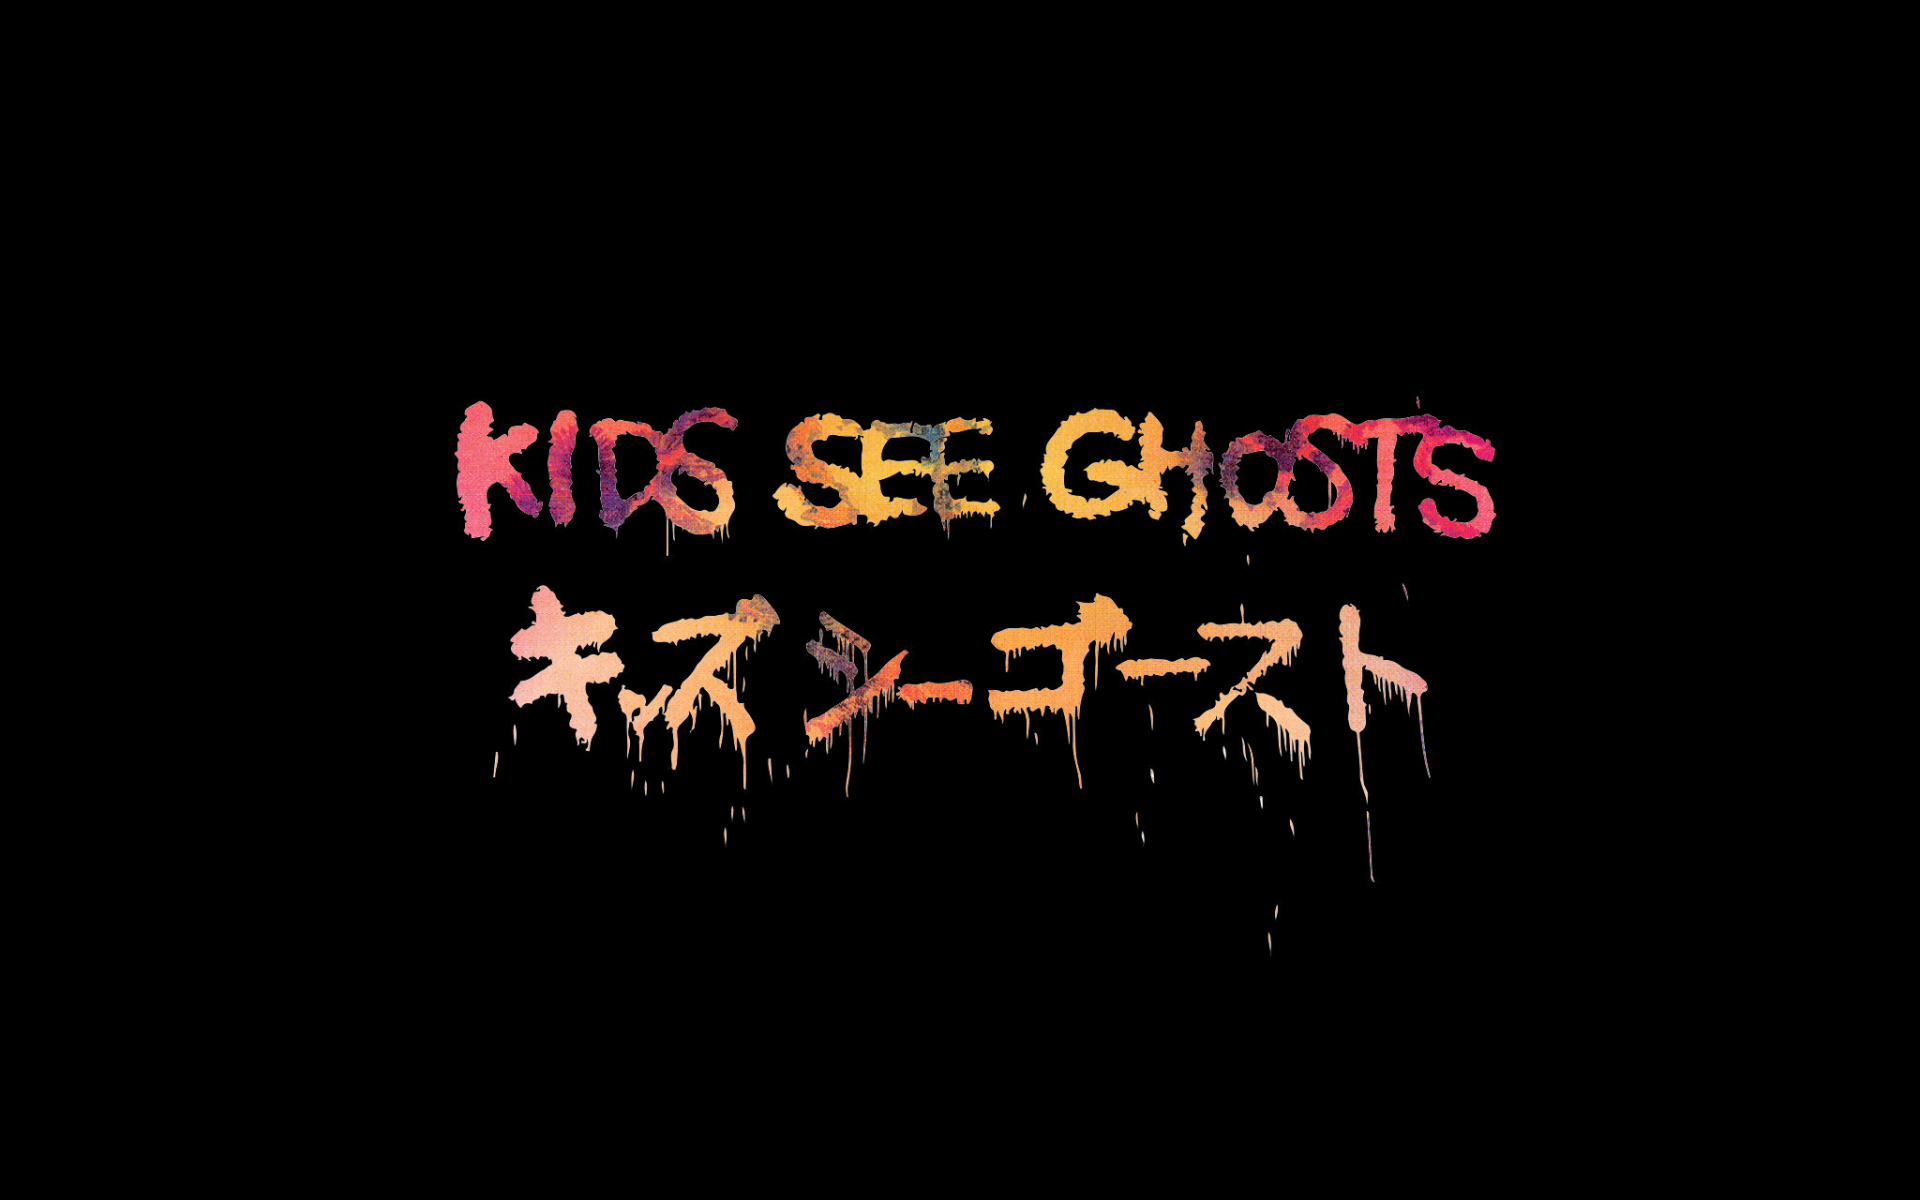 HD desktop wallpaper with 'Kids See Ghosts' text in stylized font against a black background.